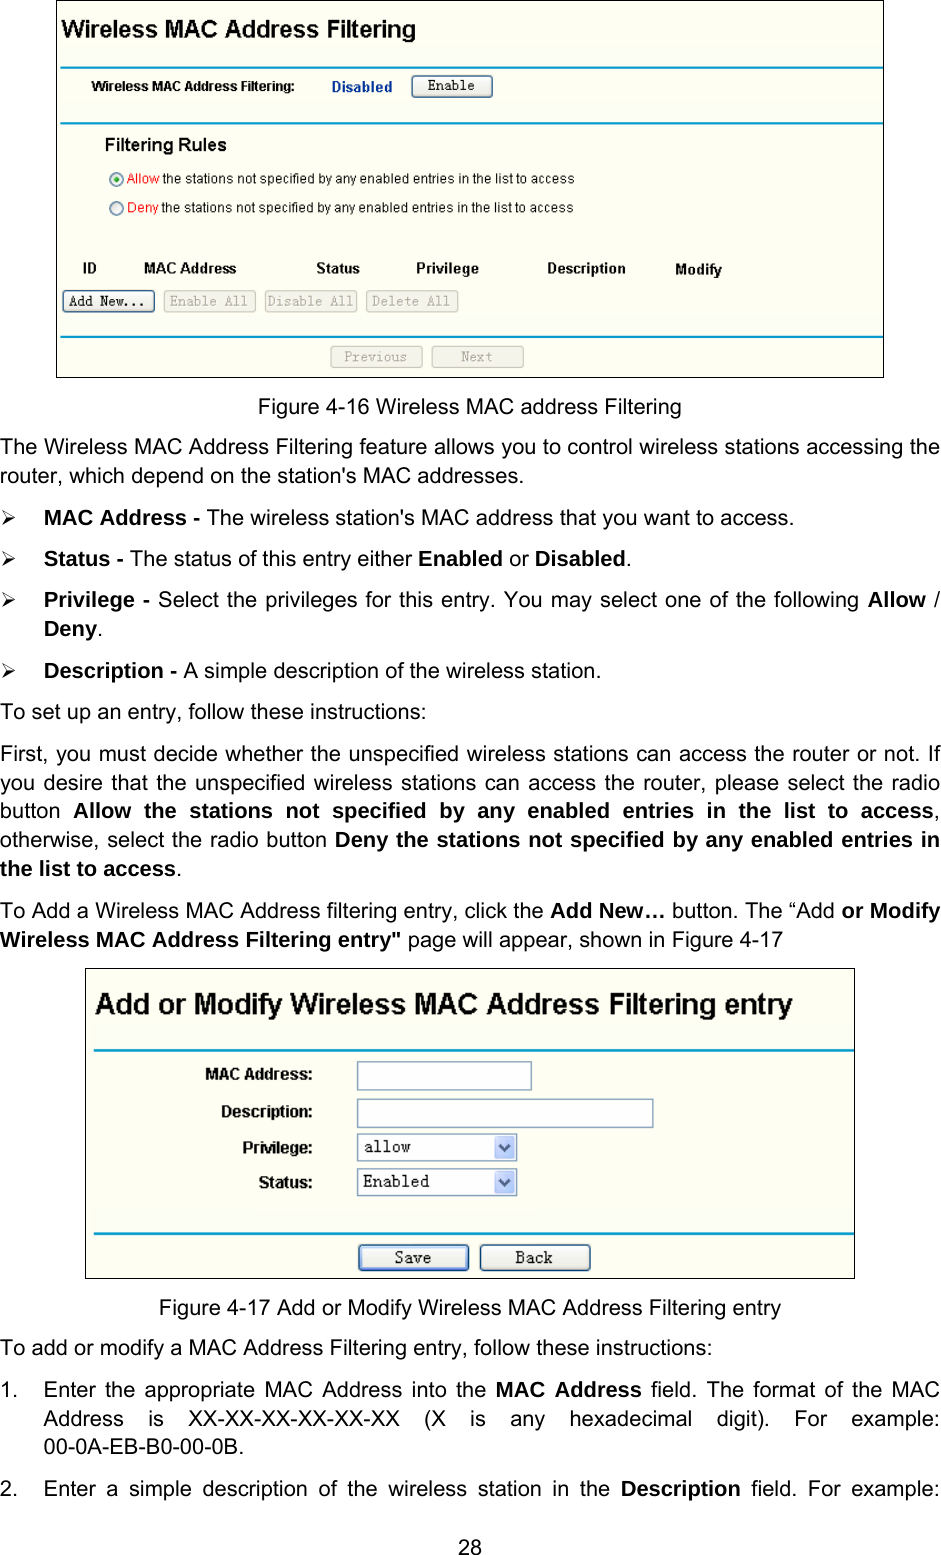  28  Figure 4-16 Wireless MAC address Filtering The Wireless MAC Address Filtering feature allows you to control wireless stations accessing the router, which depend on the station&apos;s MAC addresses.   ¾ MAC Address - The wireless station&apos;s MAC address that you want to access.   ¾ Status - The status of this entry either Enabled or Disabled. ¾ Privilege - Select the privileges for this entry. You may select one of the following Allow / Deny.   ¾ Description - A simple description of the wireless station.   To set up an entry, follow these instructions:   First, you must decide whether the unspecified wireless stations can access the router or not. If you desire that the unspecified wireless stations can access the router, please select the radio button  Allow the stations not specified by any enabled entries in the list to access, otherwise, select the radio button Deny the stations not specified by any enabled entries in the list to access. To Add a Wireless MAC Address filtering entry, click the Add New… button. The “Add or Modify Wireless MAC Address Filtering entry&quot; page will appear, shown in Figure 4-17  Figure 4-17 Add or Modify Wireless MAC Address Filtering entry To add or modify a MAC Address Filtering entry, follow these instructions: 1.  Enter the appropriate MAC Address into the MAC Address field. The format of the MAC Address is XX-XX-XX-XX-XX-XX (X is any hexadecimal digit). For example: 00-0A-EB-B0-00-0B.  2.  Enter a simple description of the wireless station in the Description field. For example: 